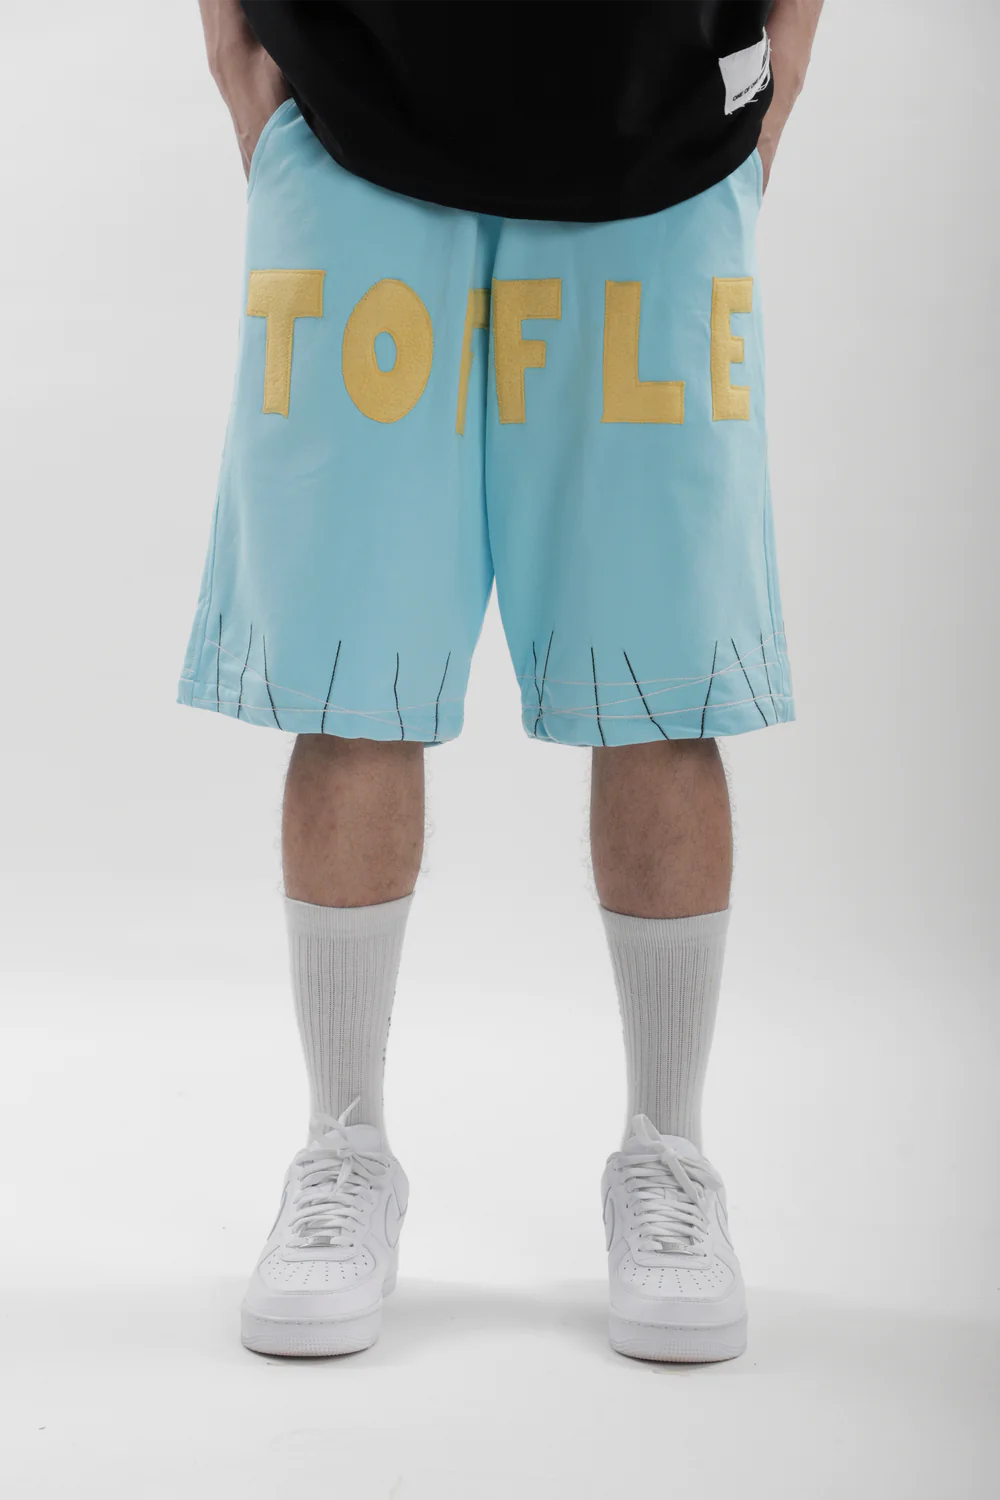 Scenic Shorts, a product by TOFFLE